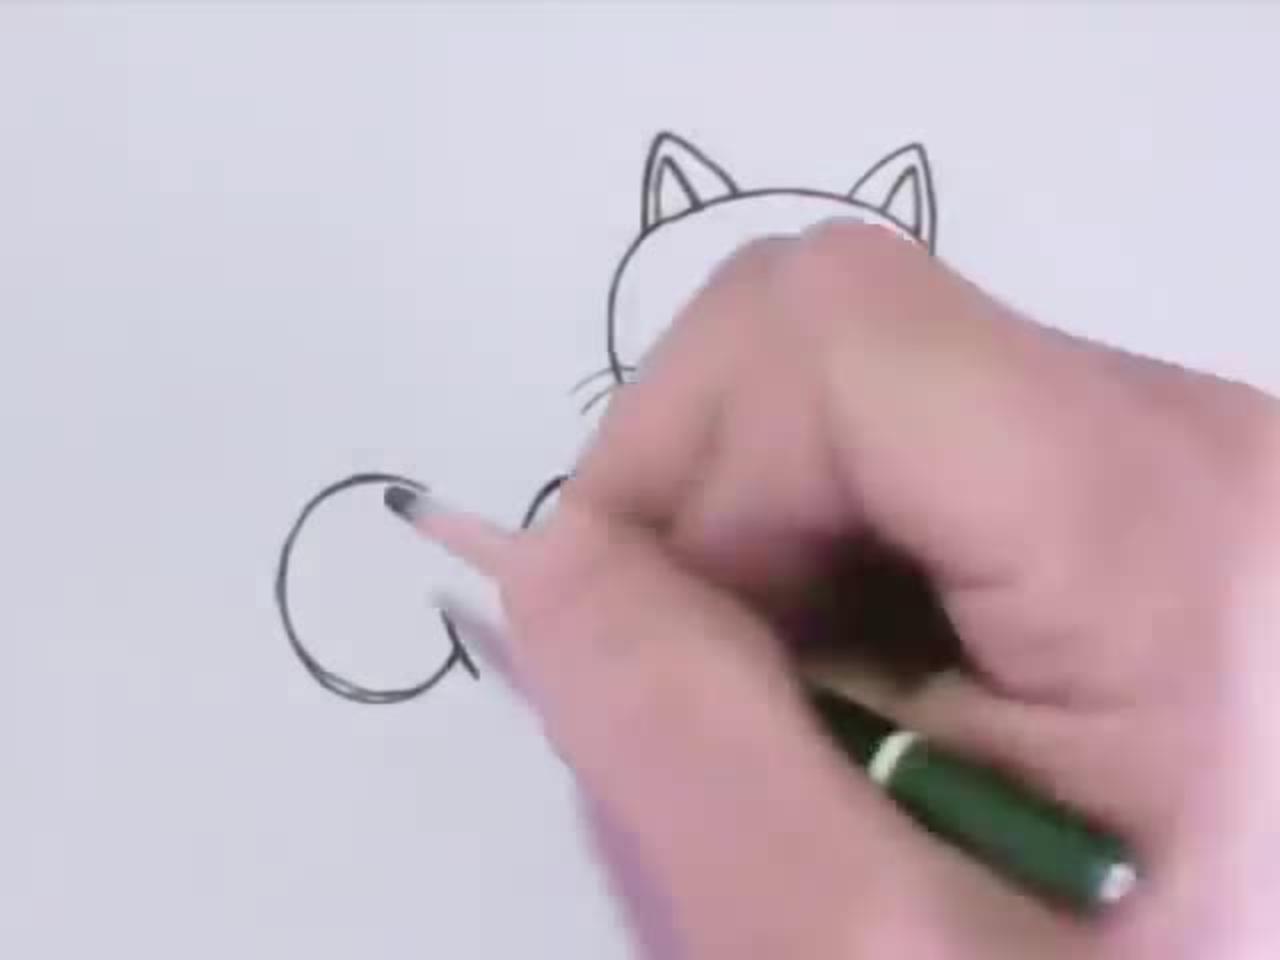 Very Easy How to turn Words Cat Into a Cartoon Cat Wordtoons learning step by step for kid_